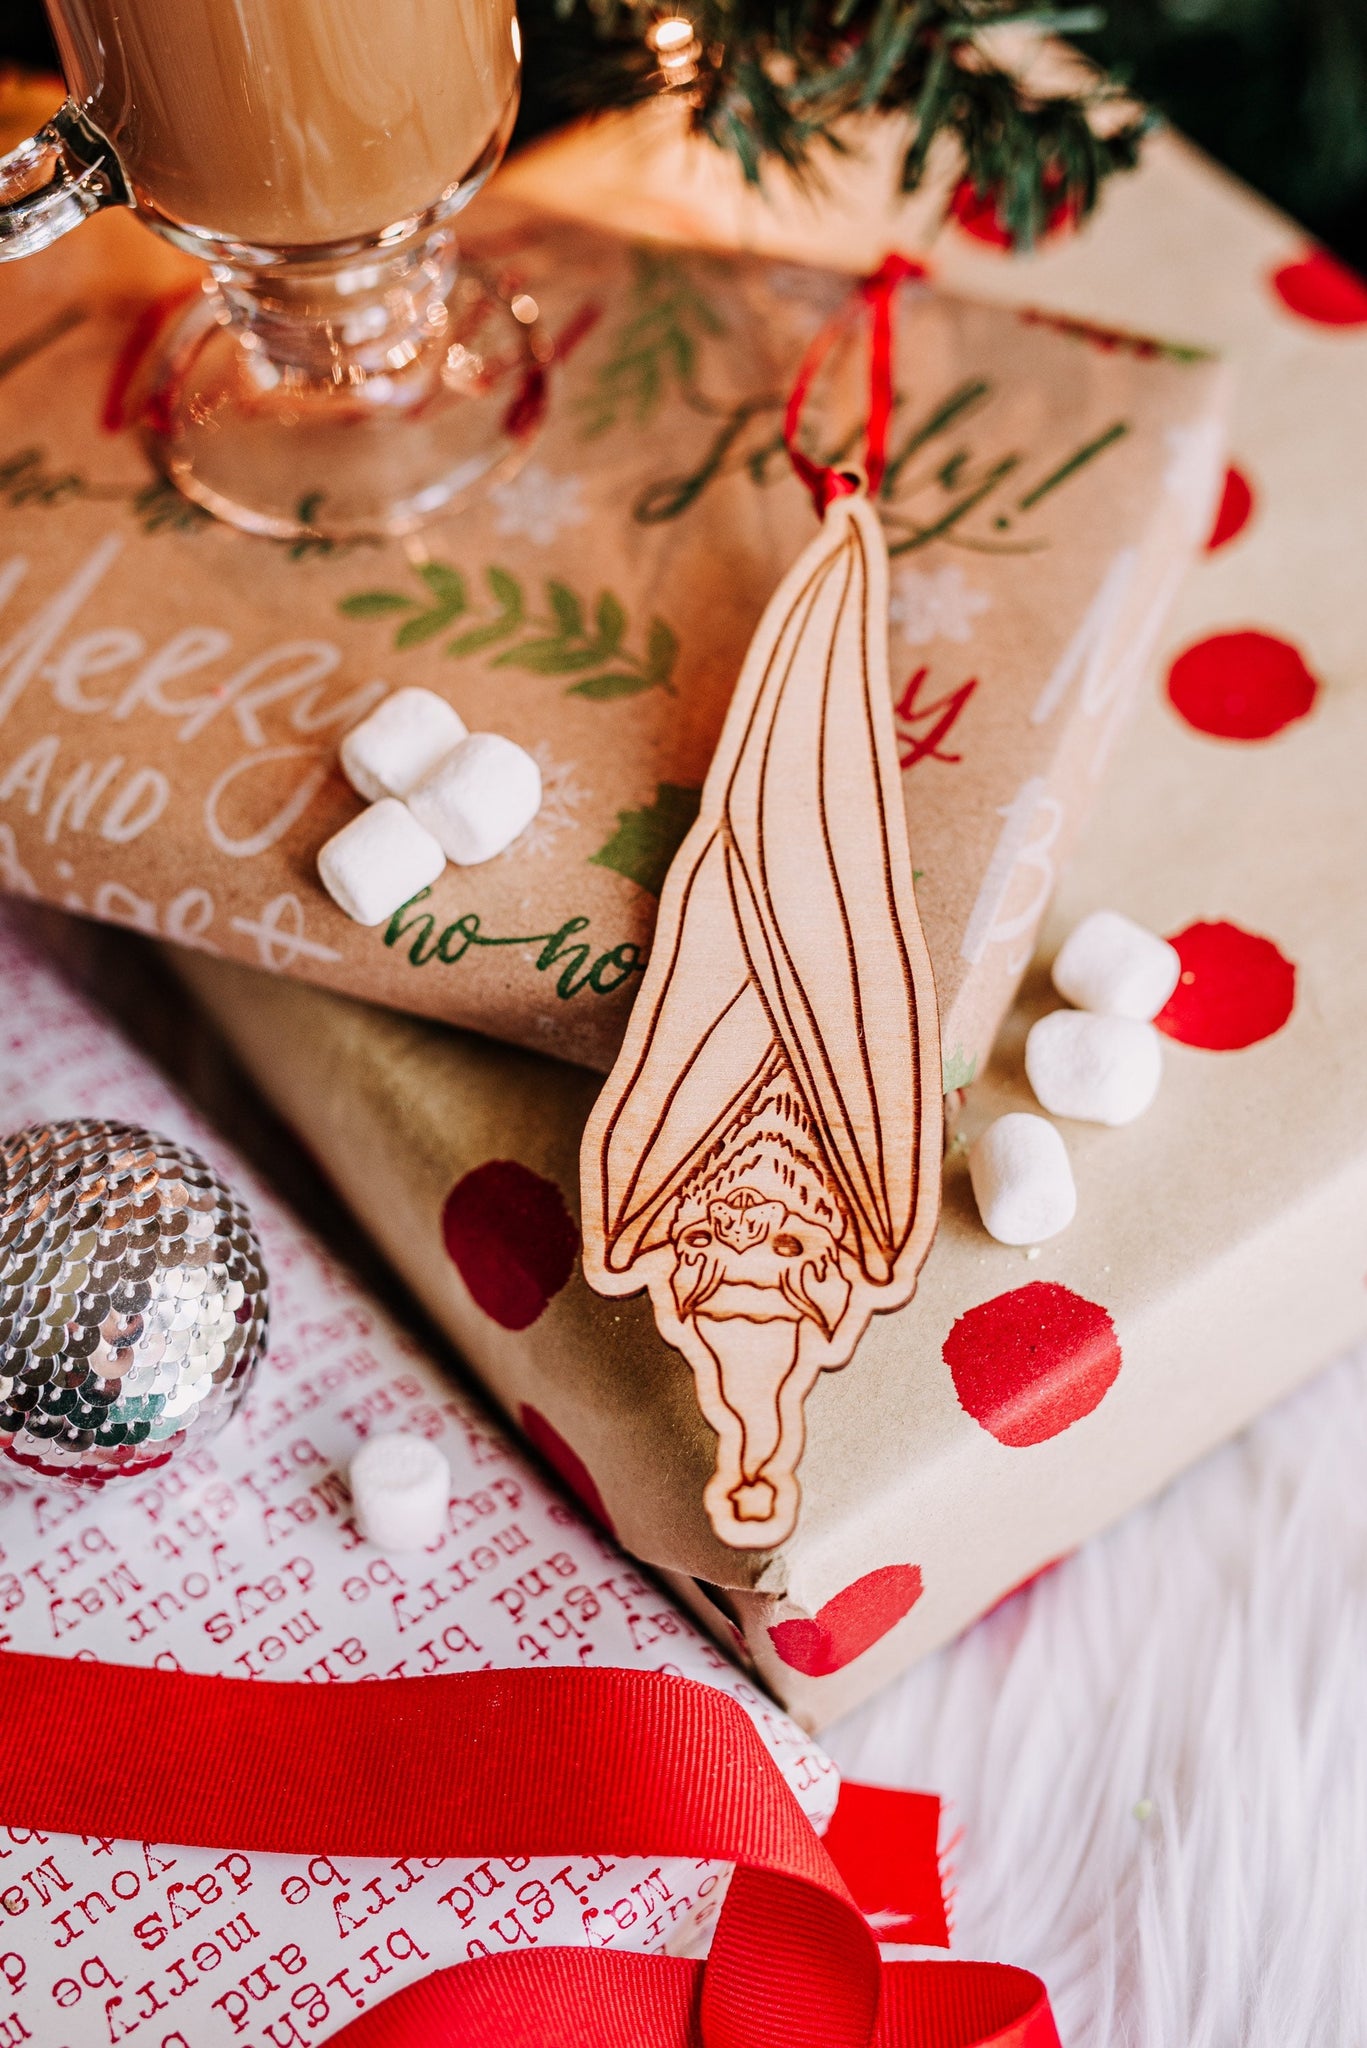 Hanging Bat Halloween Christmas Ornament Gift For Her, Cute Hanging Bat With Santa Hat Wooden Christmas Ornament Halloween Gift